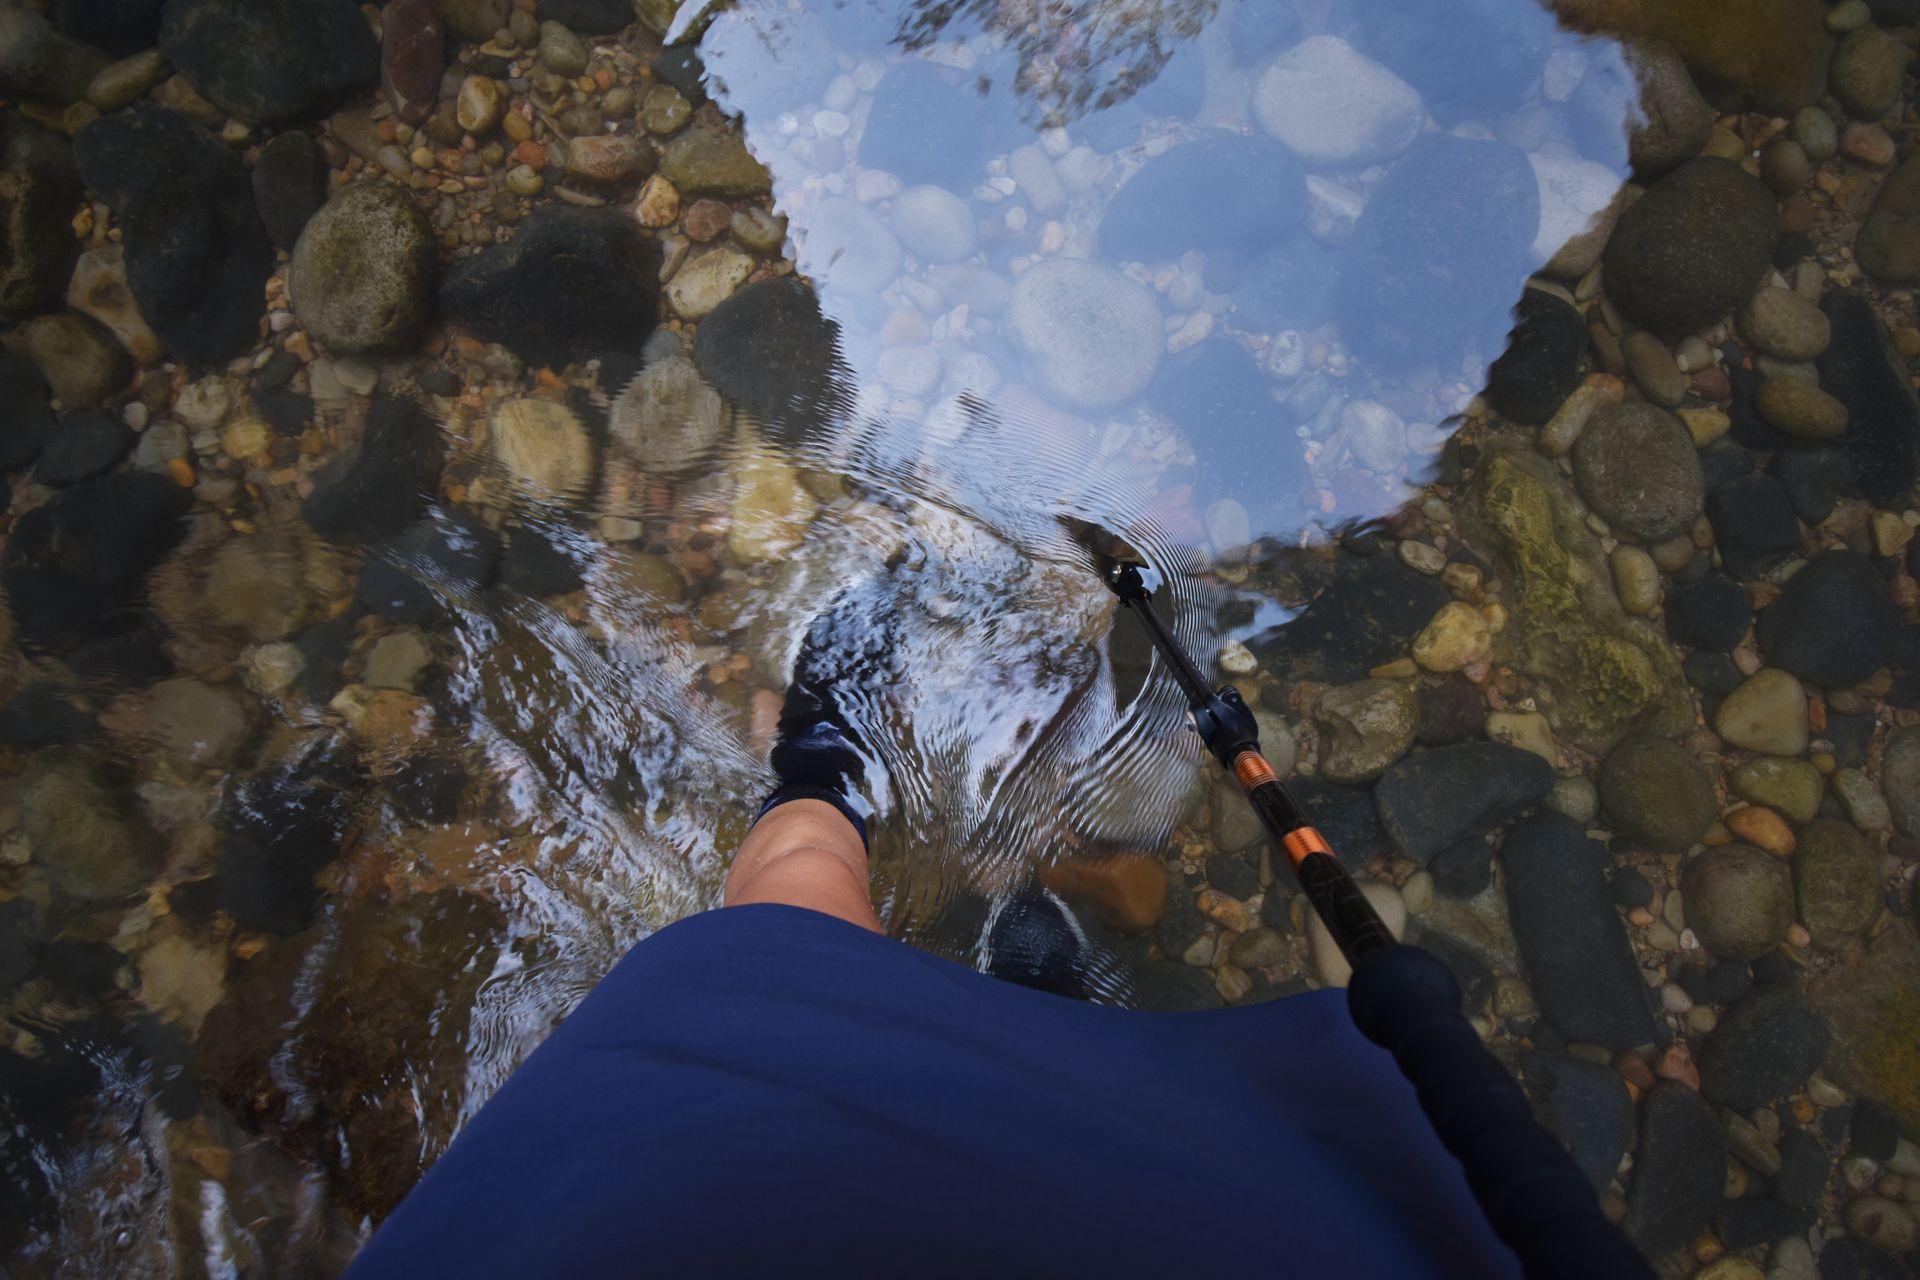 Looking down at Lydia's feet in the water during the Narrows hike.